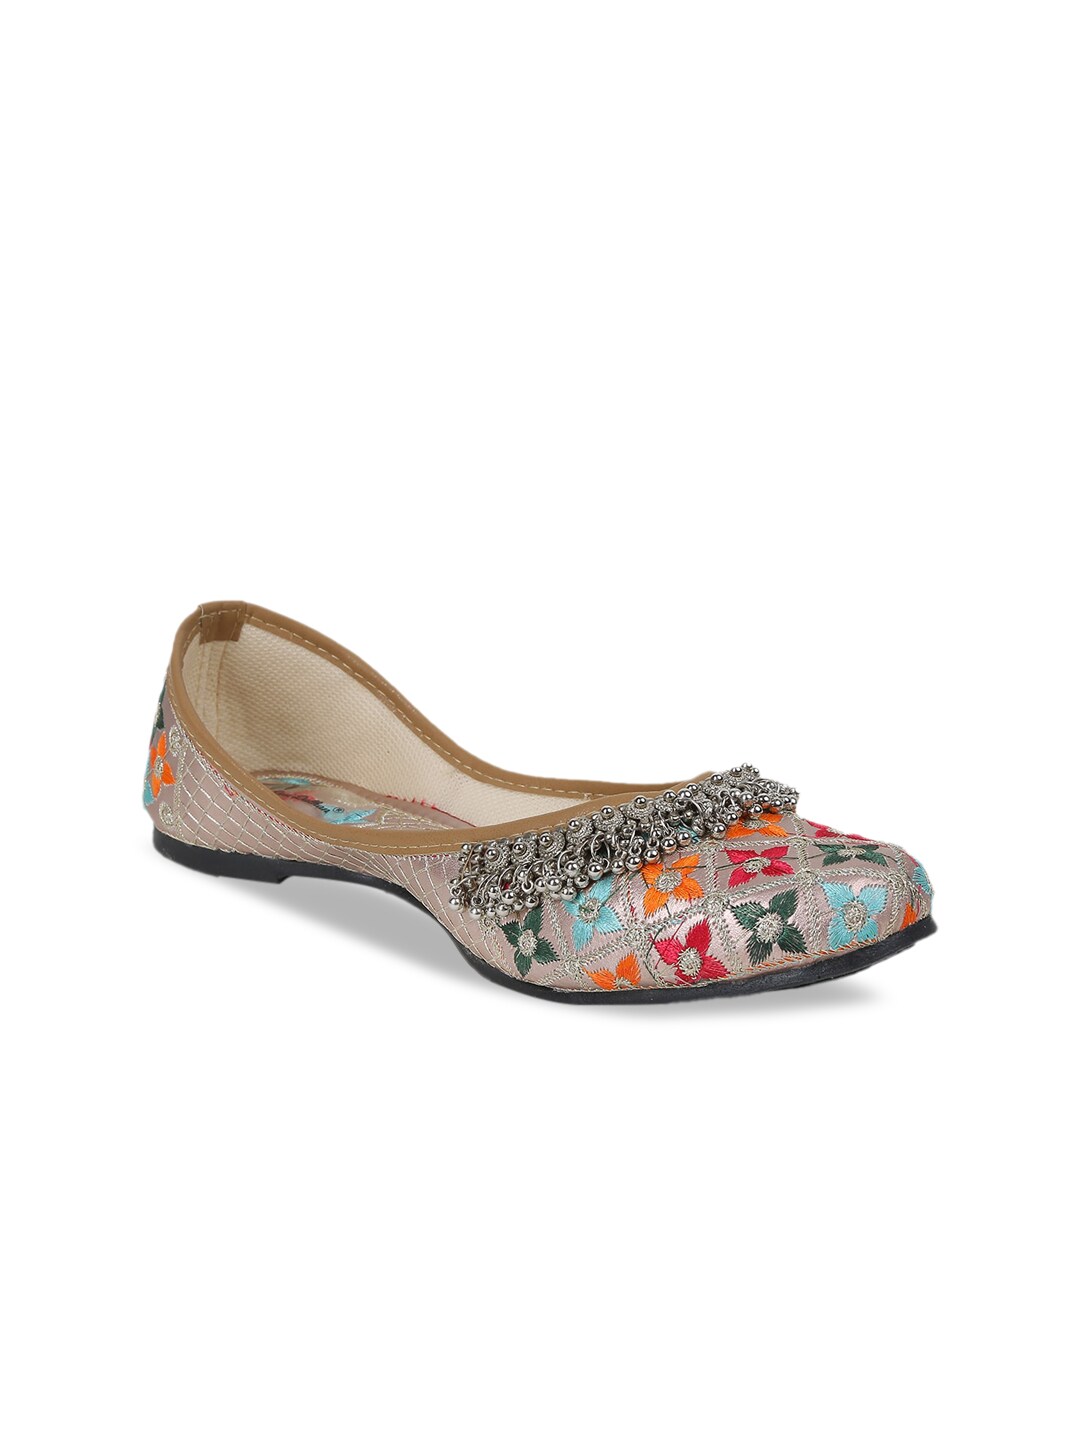 The Desi Dulhan Women Copper-Toned Ballerinas Flats Price in India